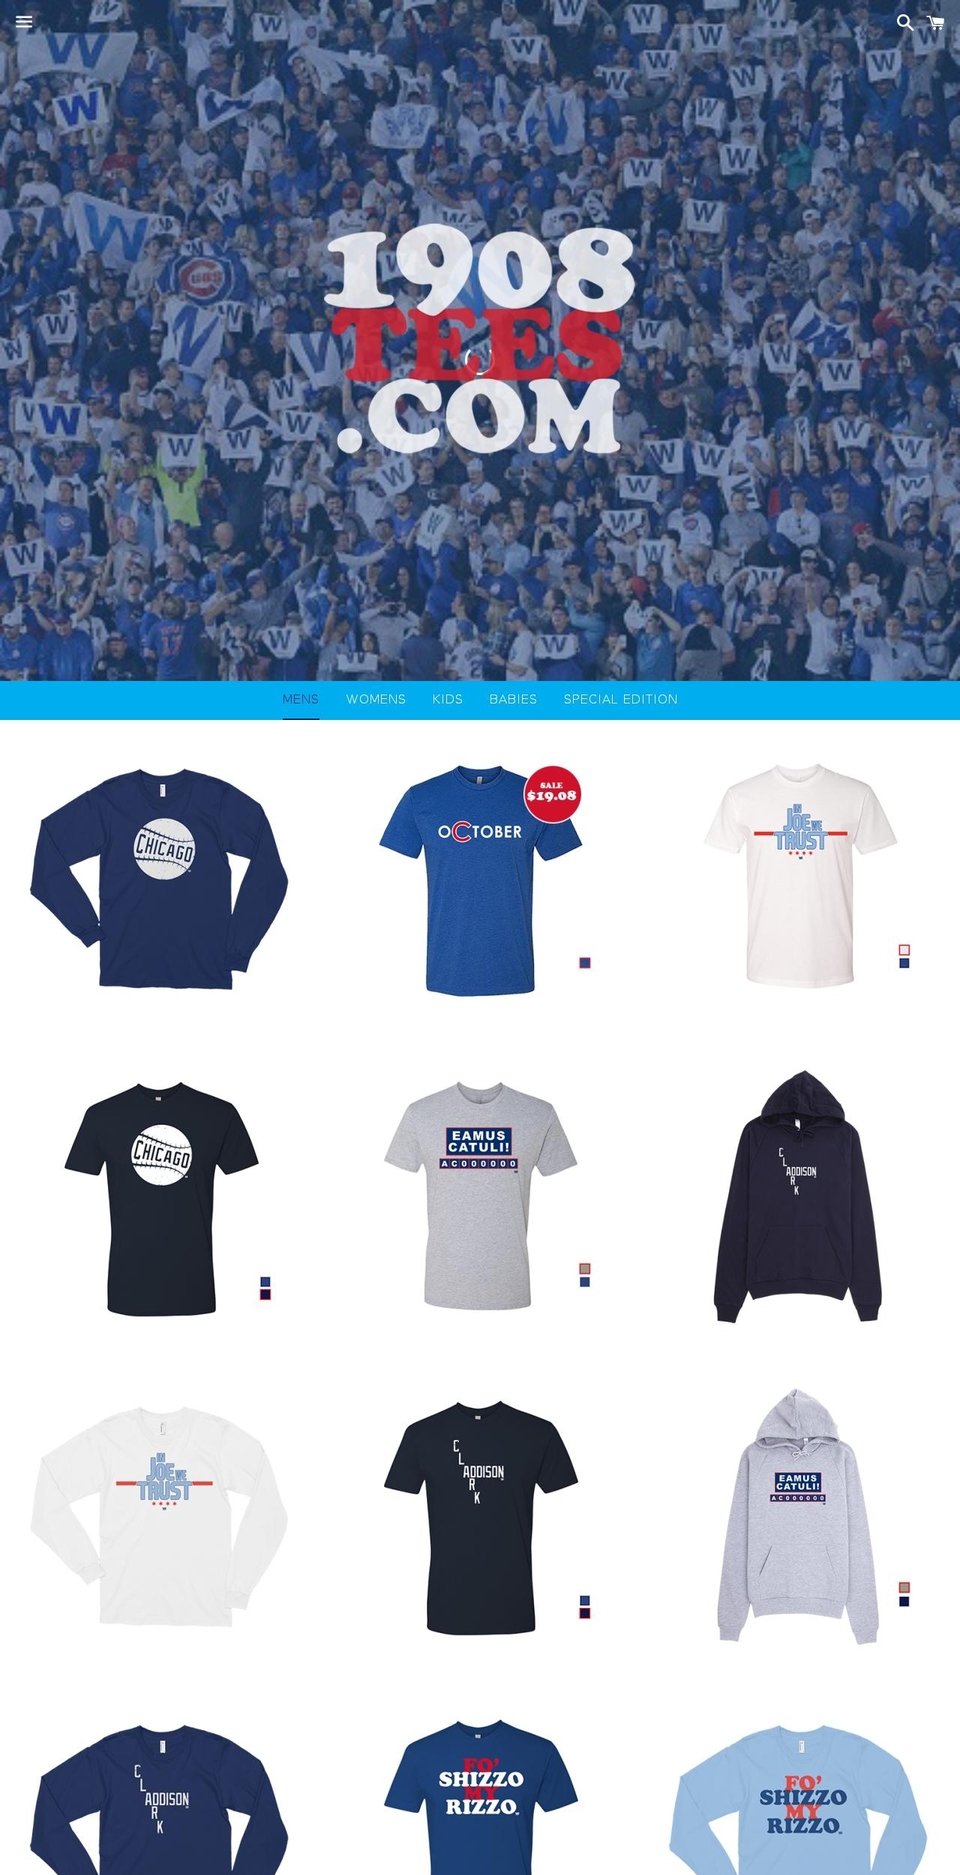 Capital Shopify theme site example 1908tees.com